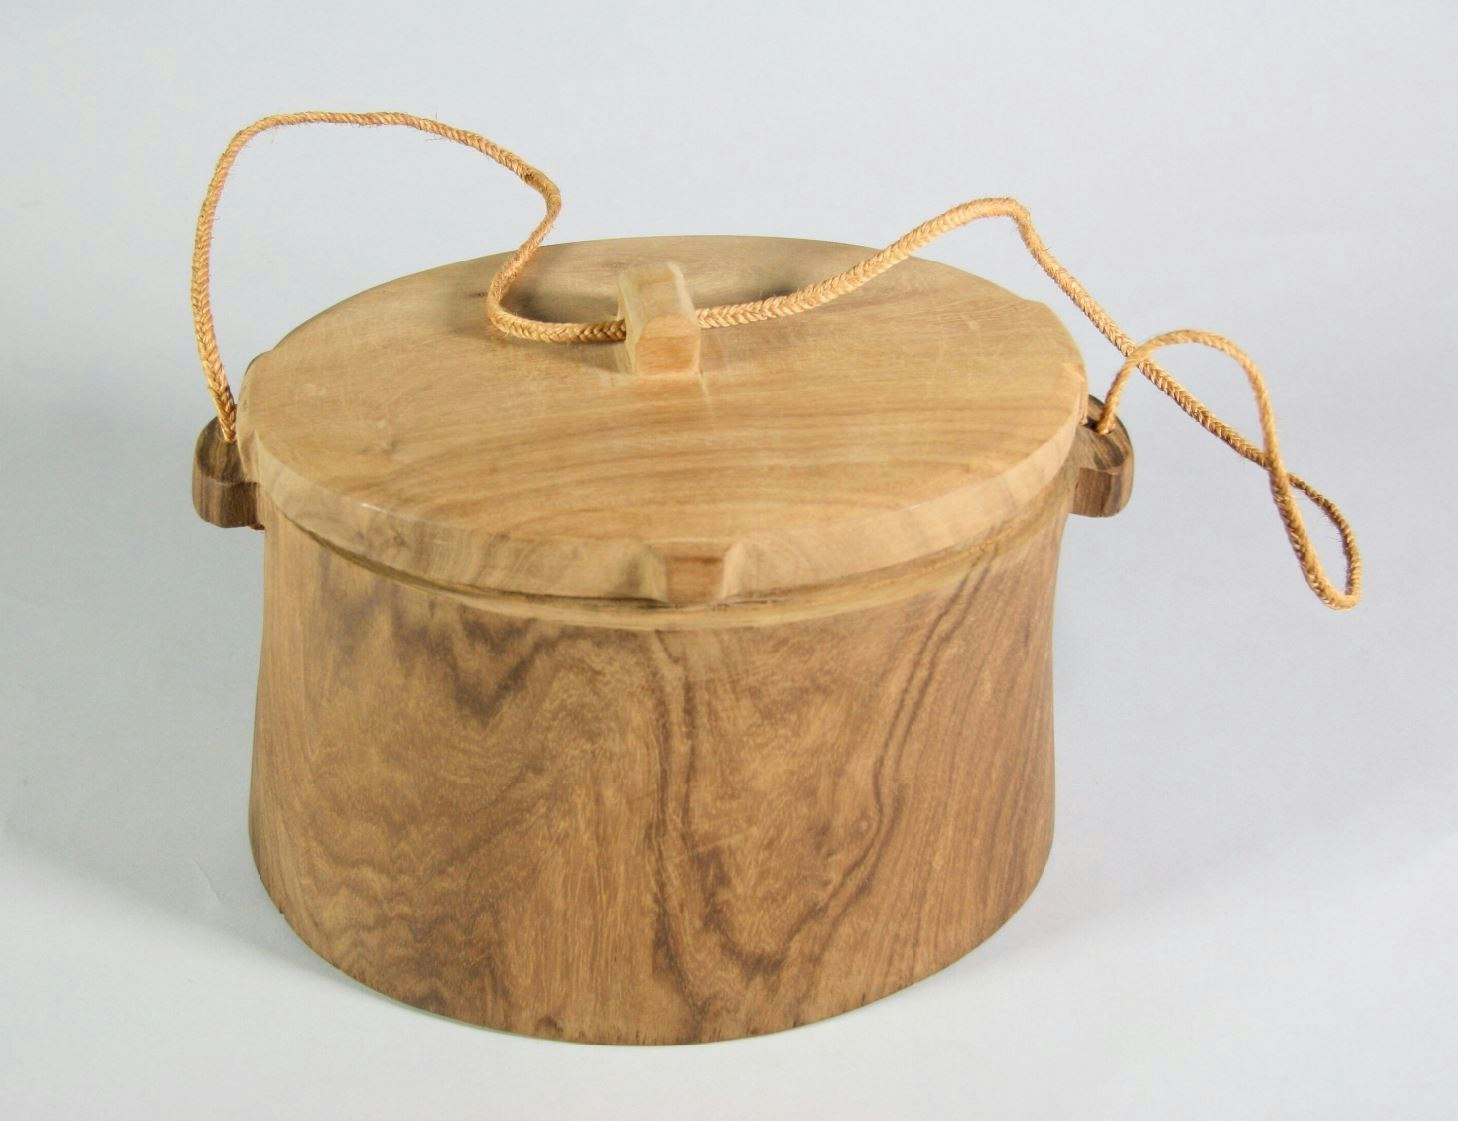 Small wooden box with a string handle